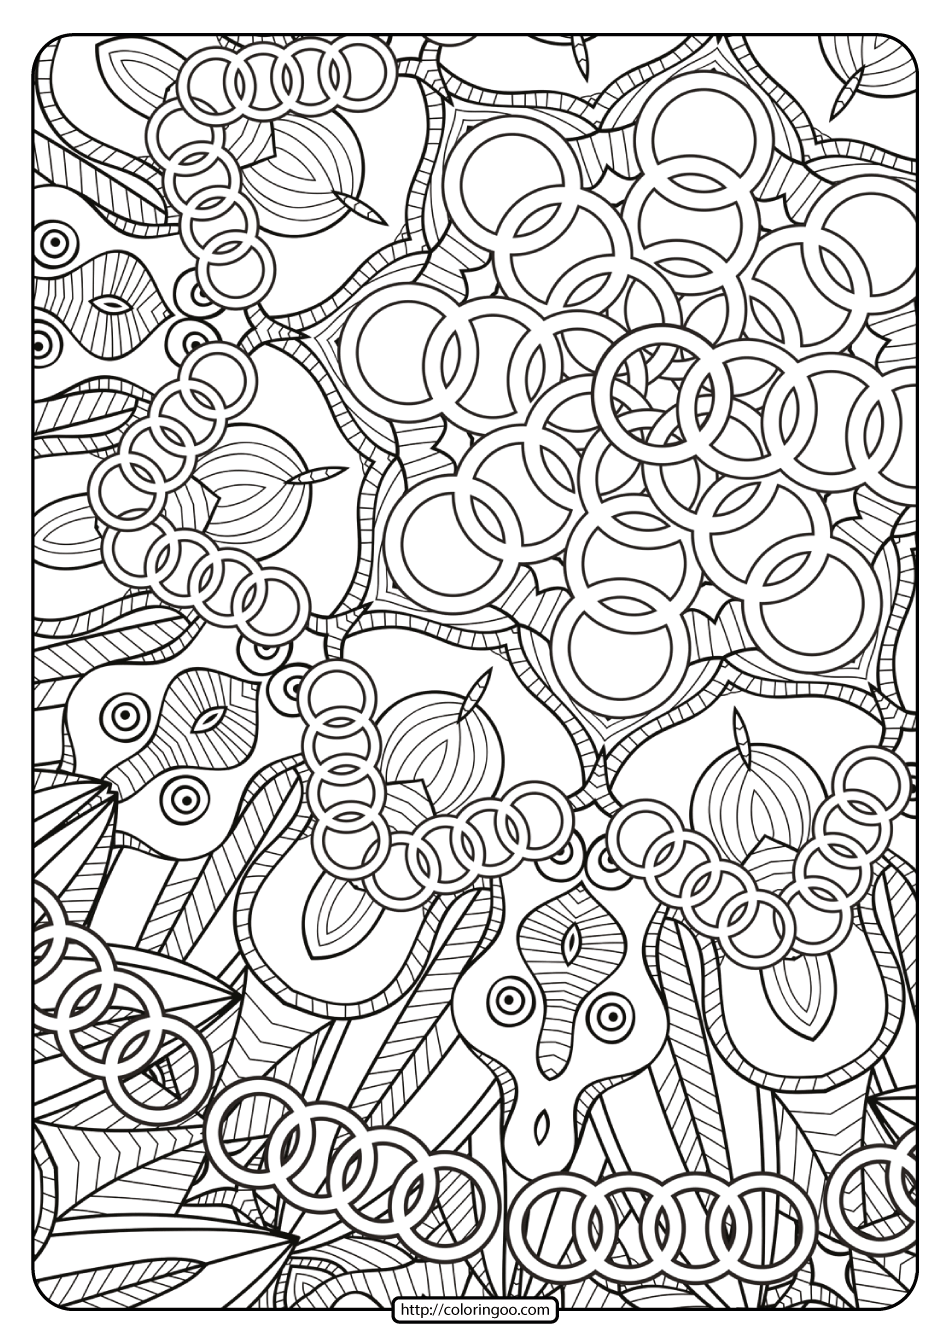 Printable Audi Cars Coloring Book & Page - 05